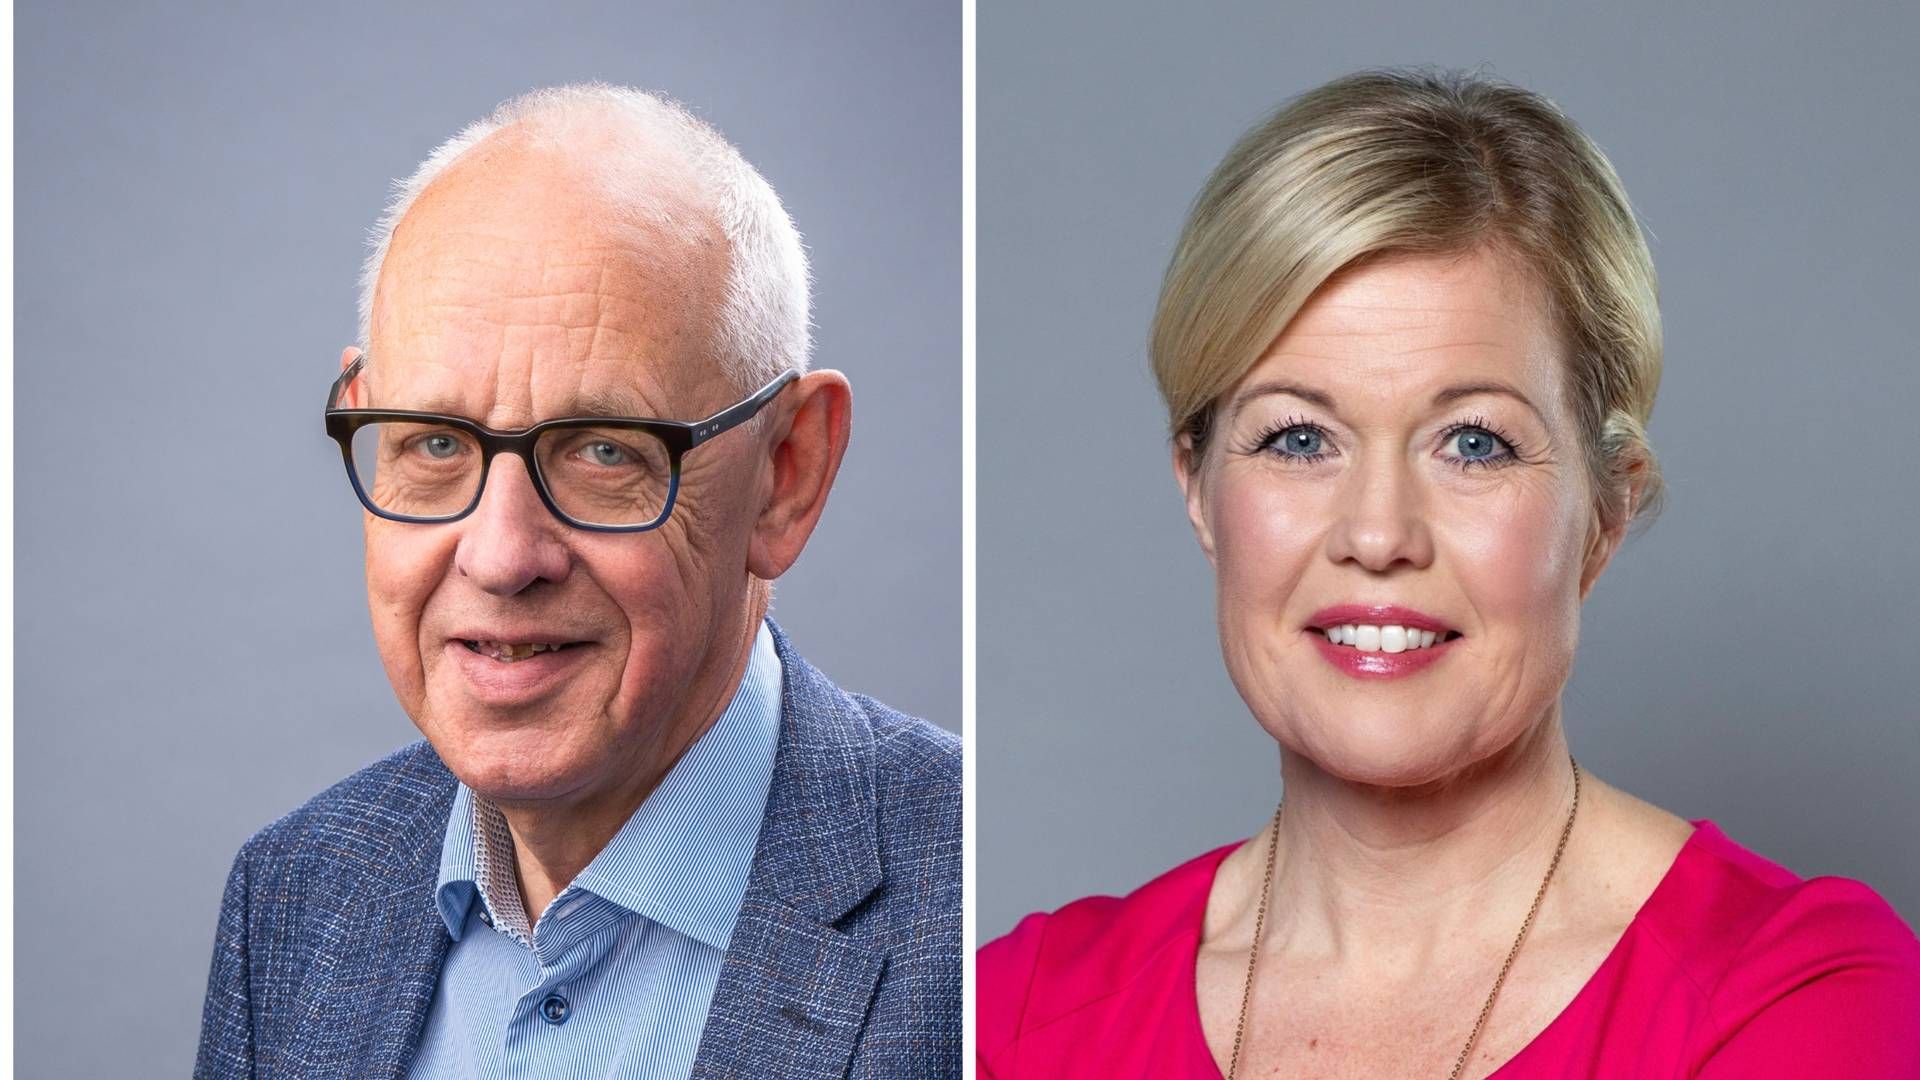 FTN chair Mats Sjöstrand and the director general of the Swedish Pensions Agency, Anna Pettersson Westerberg, have both reacted to criticism from the Swedish Investment Fund Association. | Photo: Fondtorgsnämnden / Pensionsmyndigheten / PR